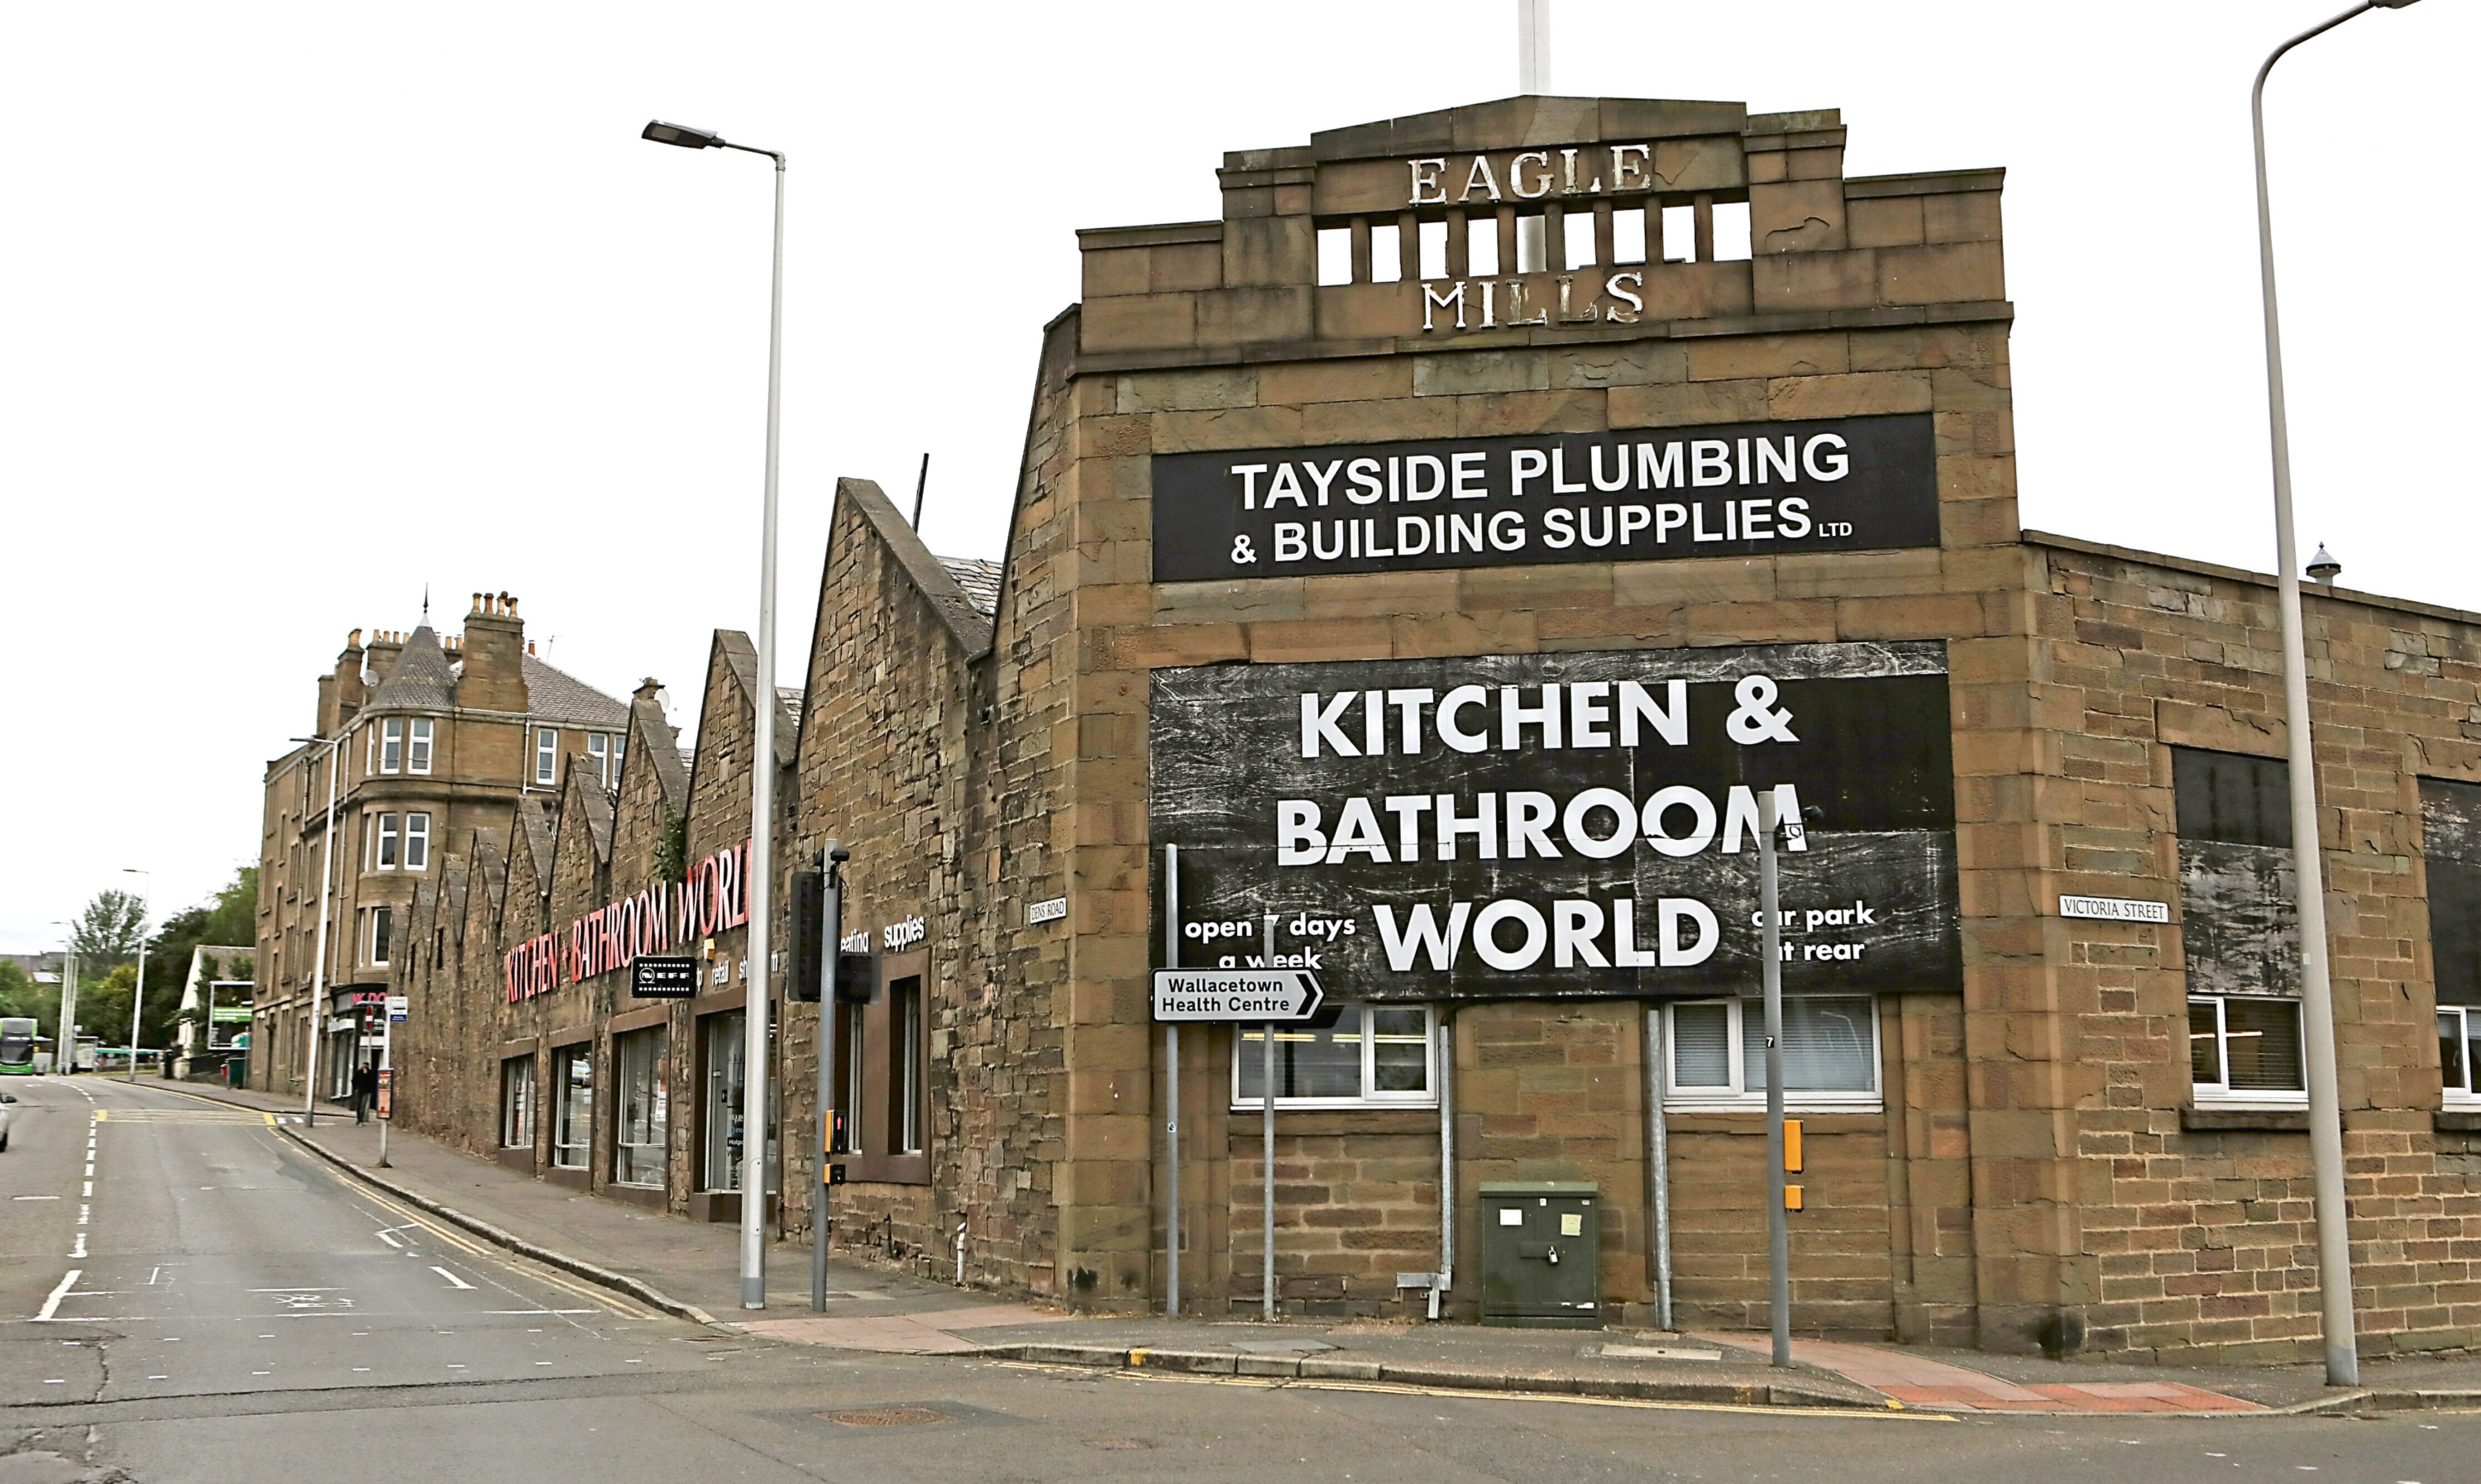 Tayside Plumbing & Building Supplies Ltd at Eagle Mills, Dundee